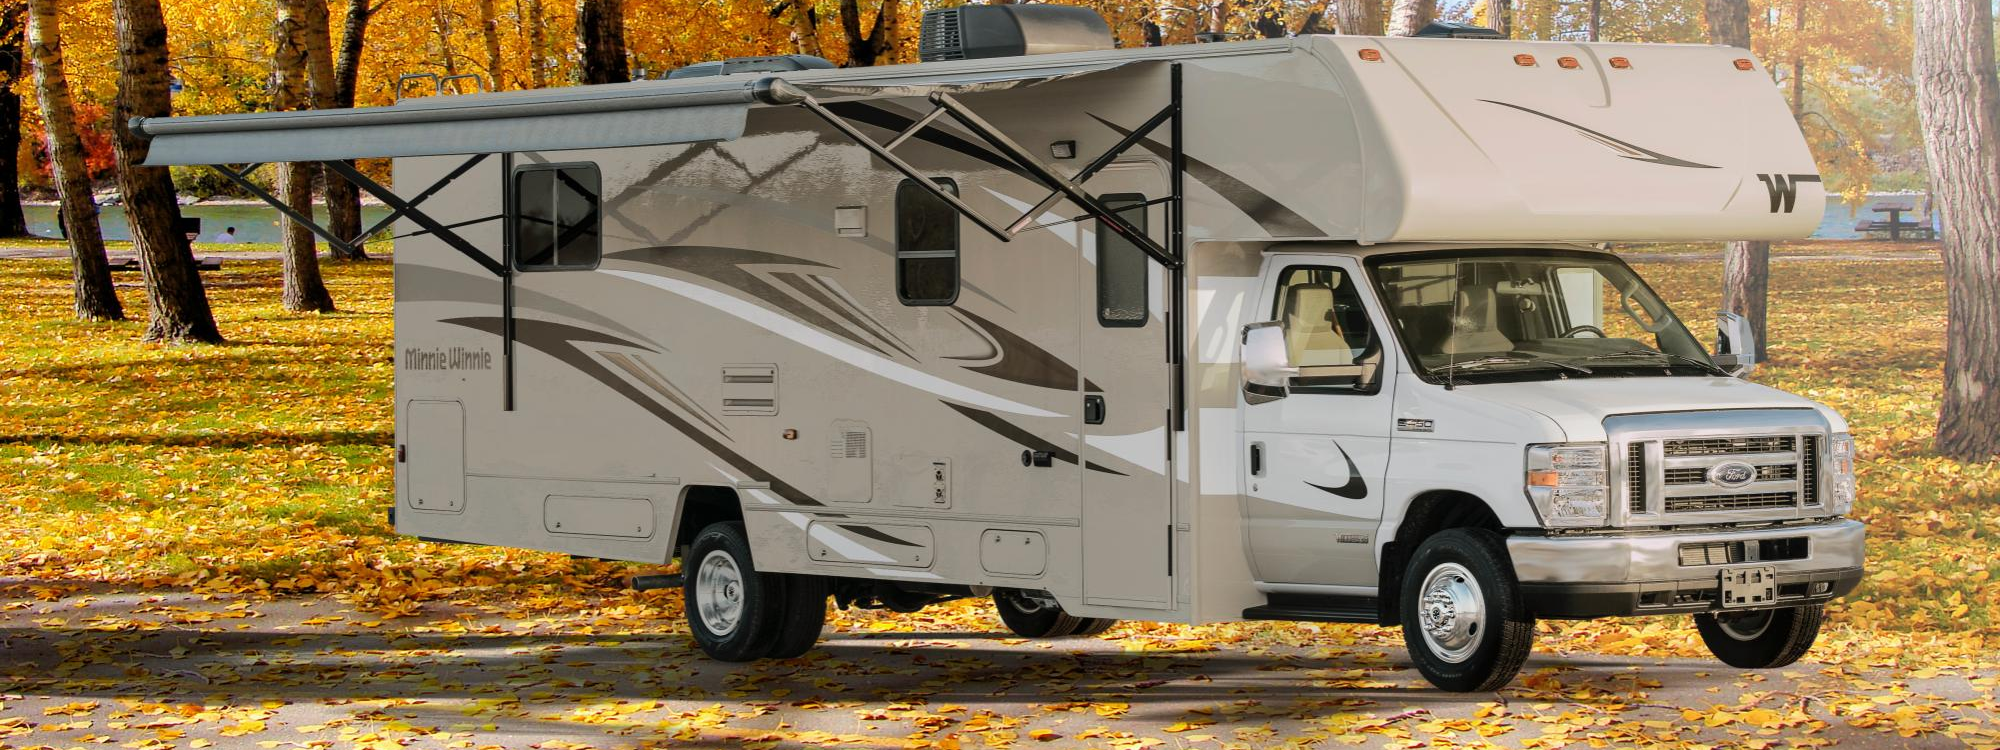 Winnebago Minnie Winnie with the awning extended with fall color trees in the background